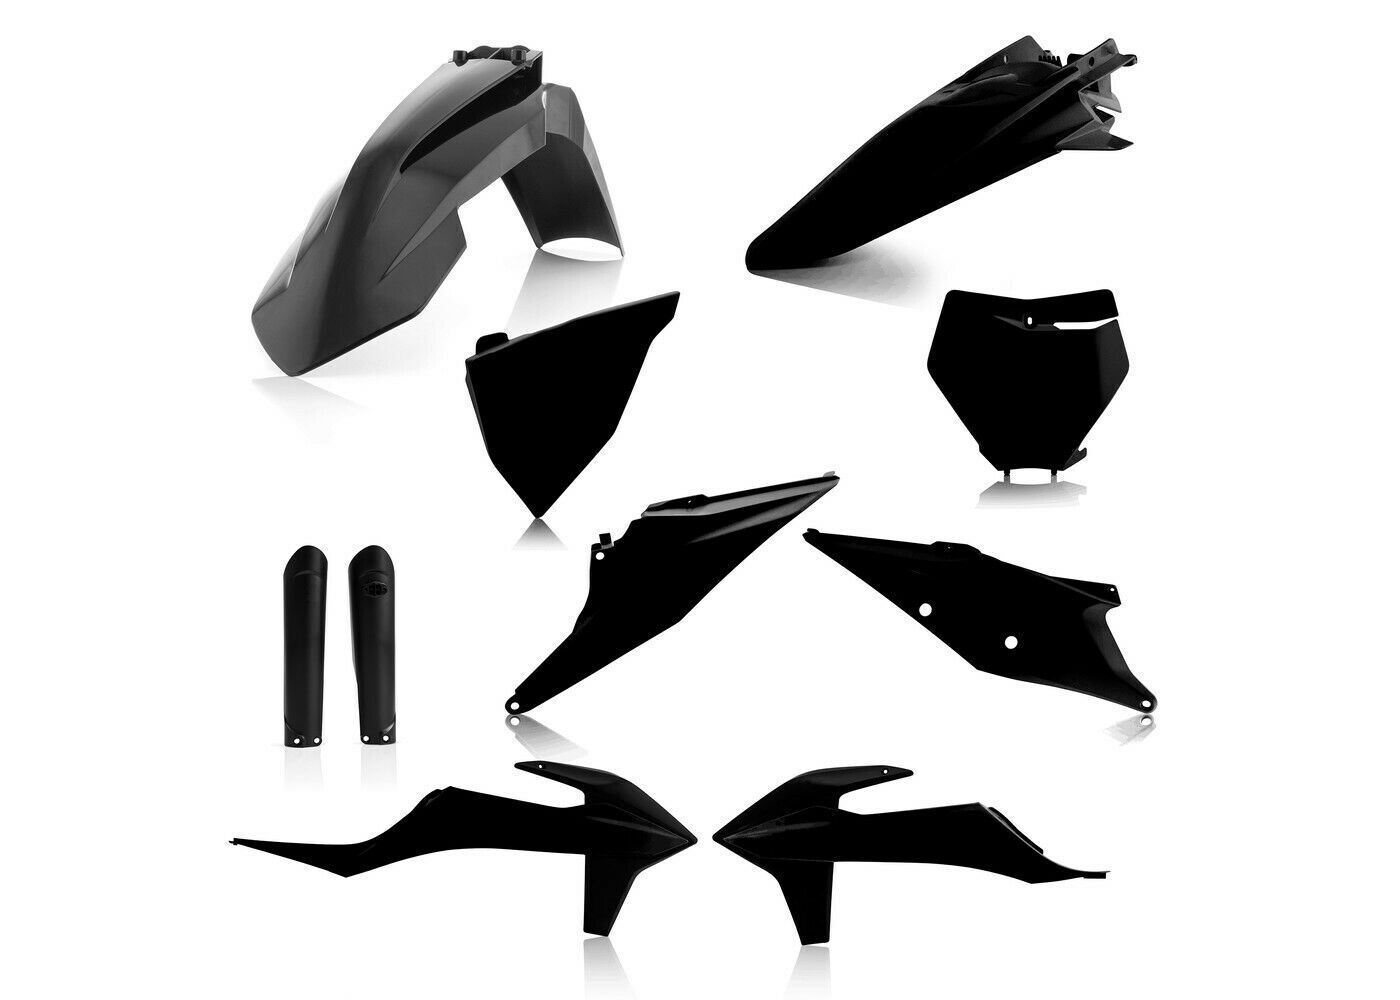 Acerbis Full Plastic Kit for 2019-2022 KTM SX SXF XC XCF - your choice of colors